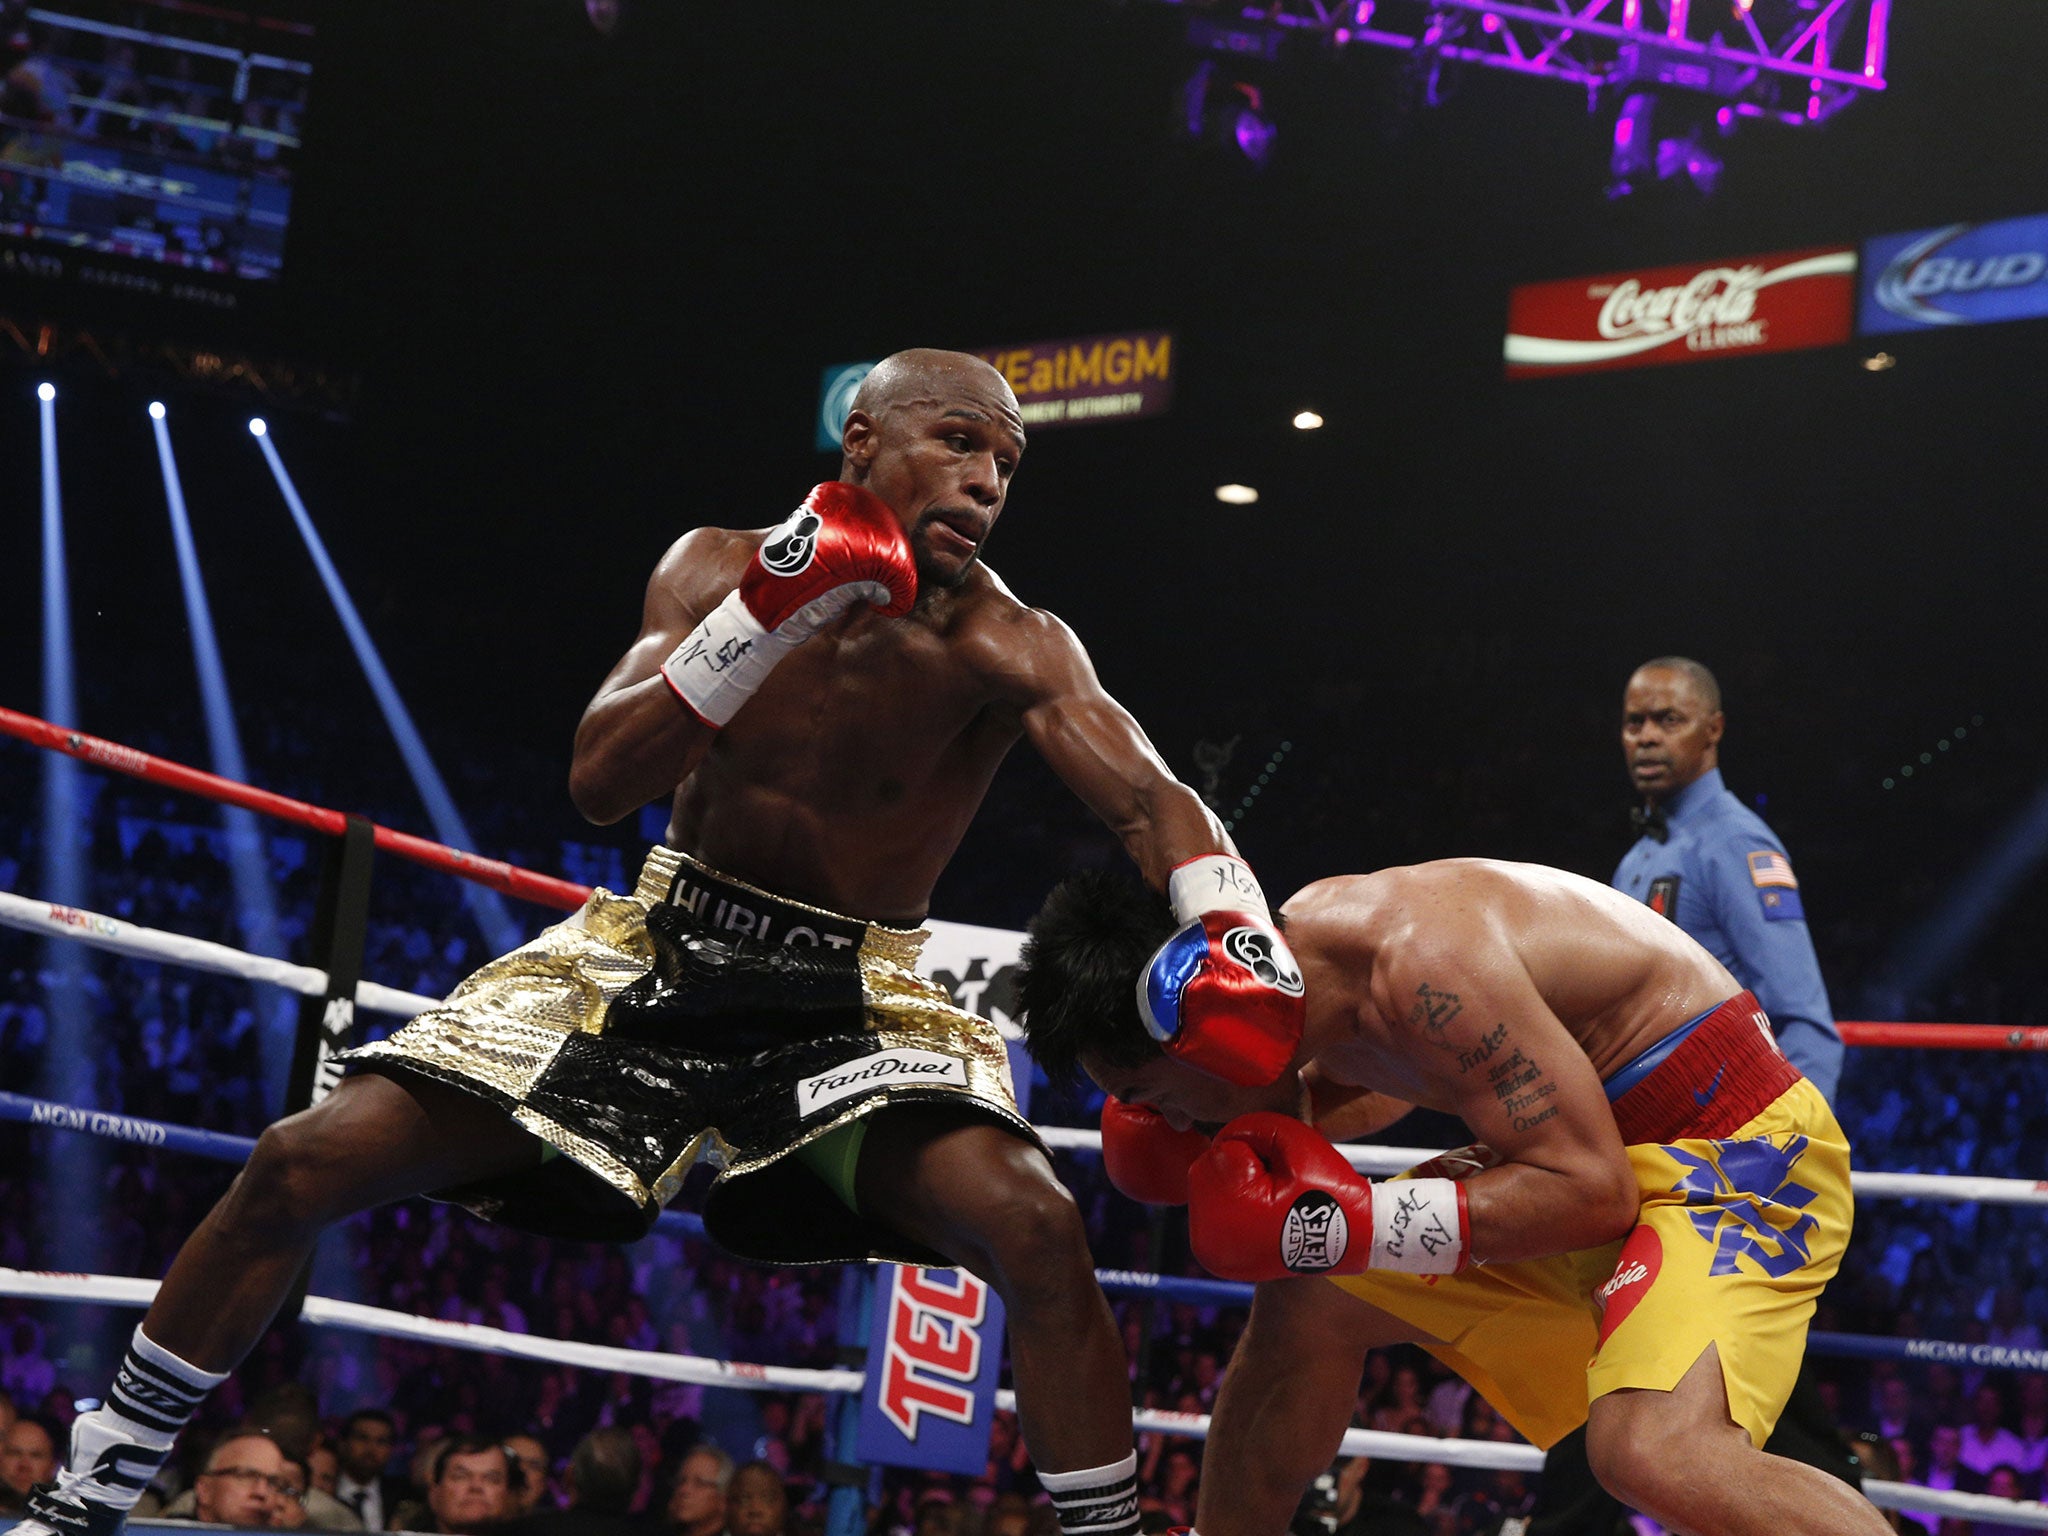 Mayweather threw and landed more clean punches than Pacquiao